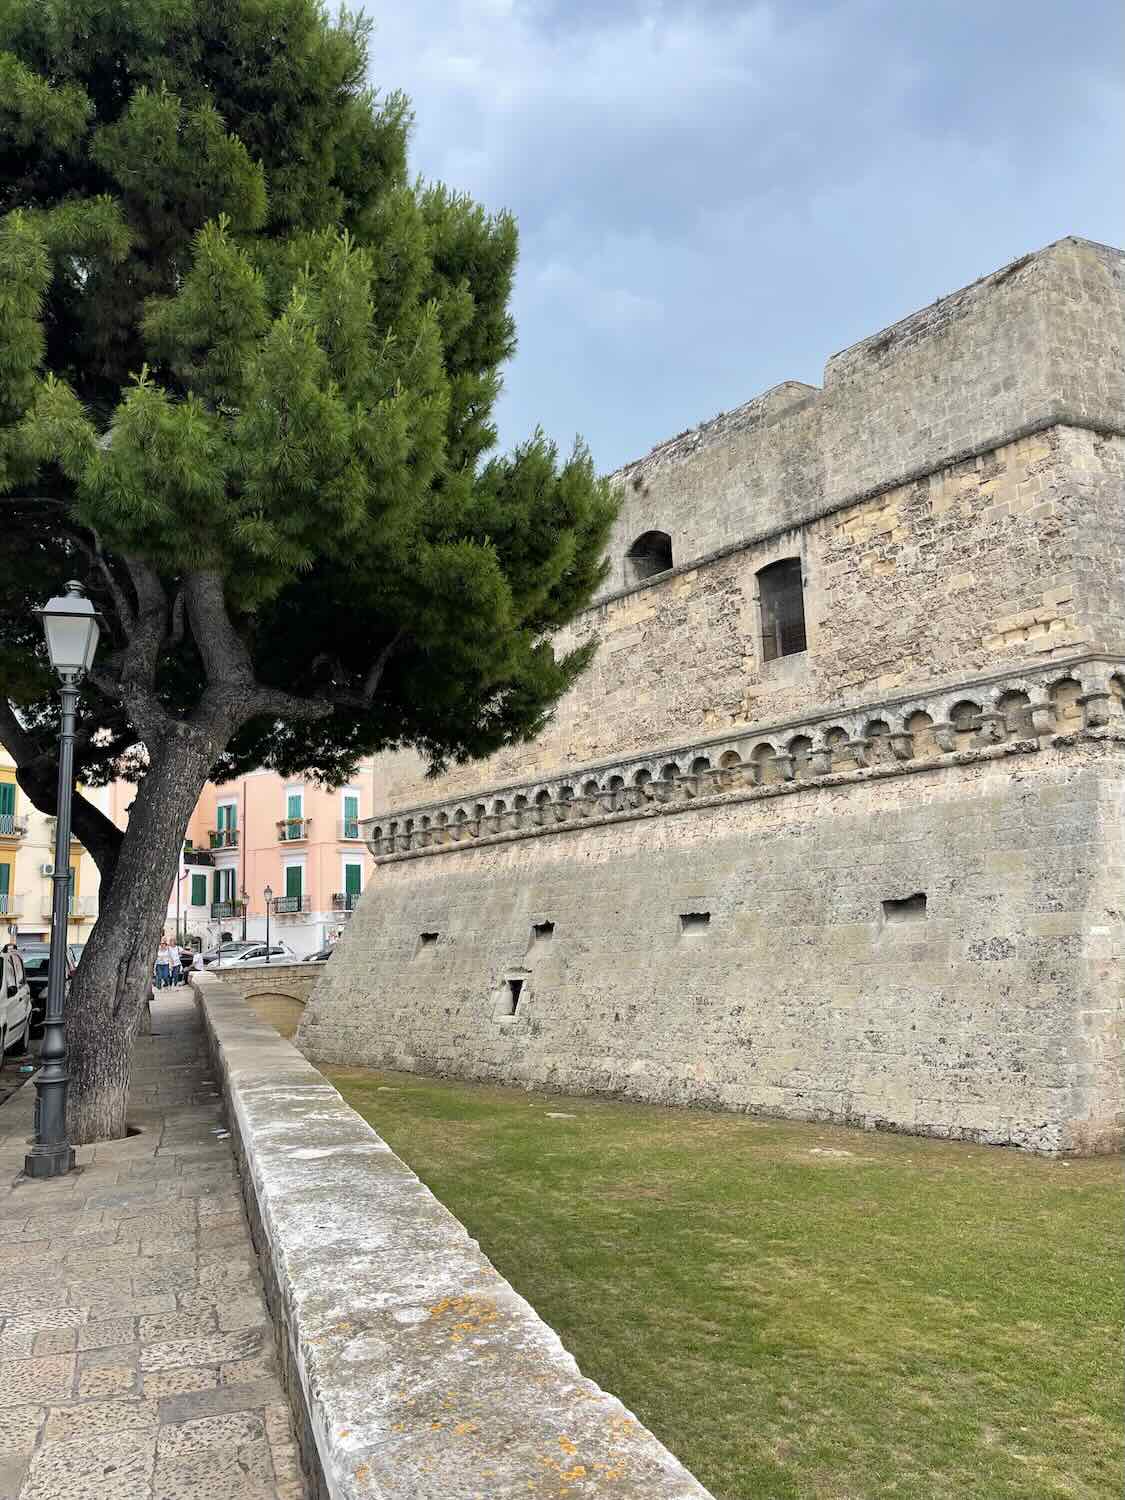 A photo of the exterior of a historic castle in Bari, Italy. The stone structure features thick walls with small windows and a crenelated parapet. A large tree and a stone pathway with a lamp post are visible in the foreground, and colorful buildings can be seen in the background.